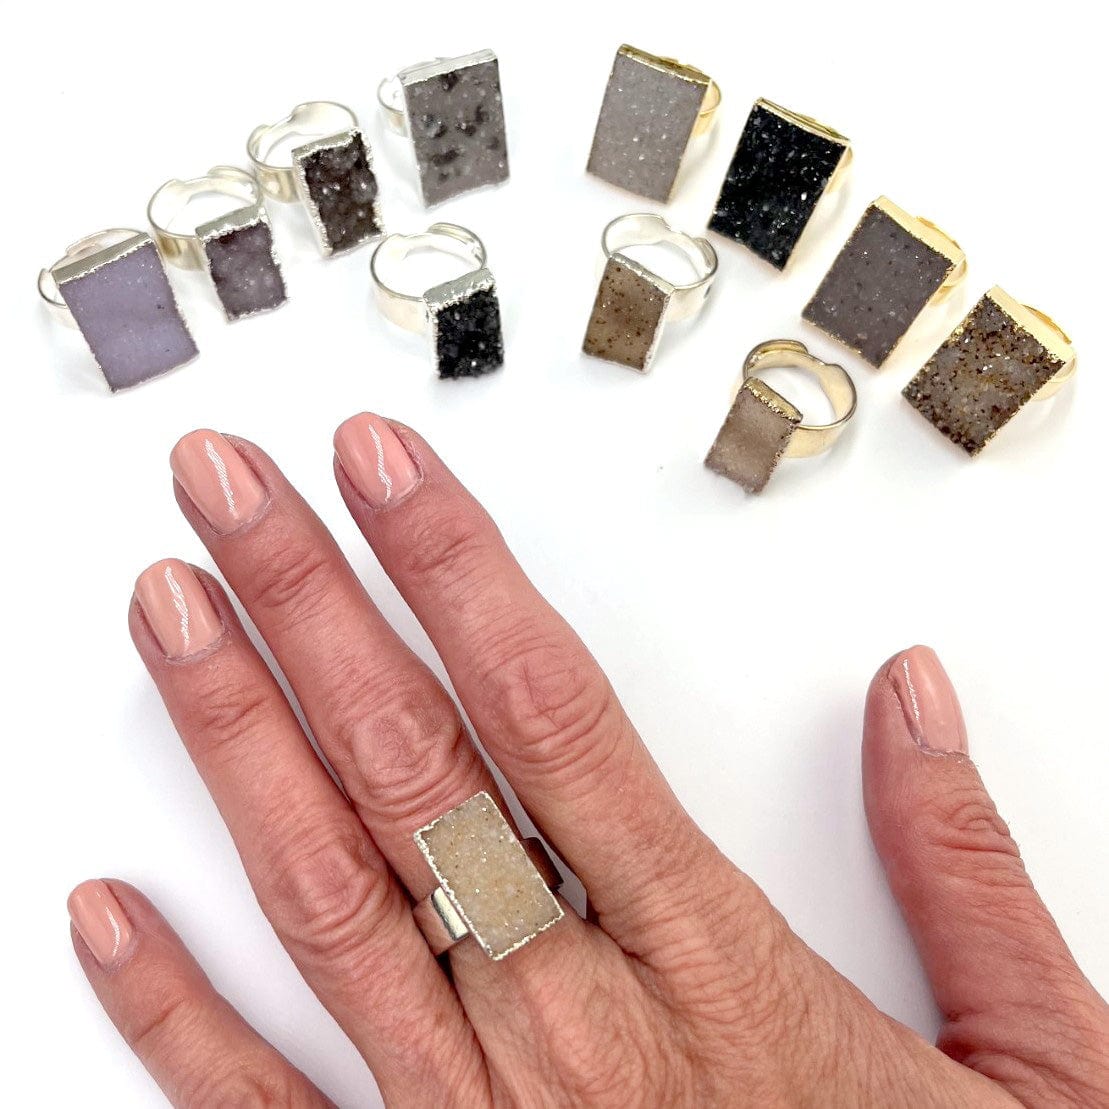 Quartz Druzy Rectangle Adjustable Ring on a hand and others in background showing different colors of druzy